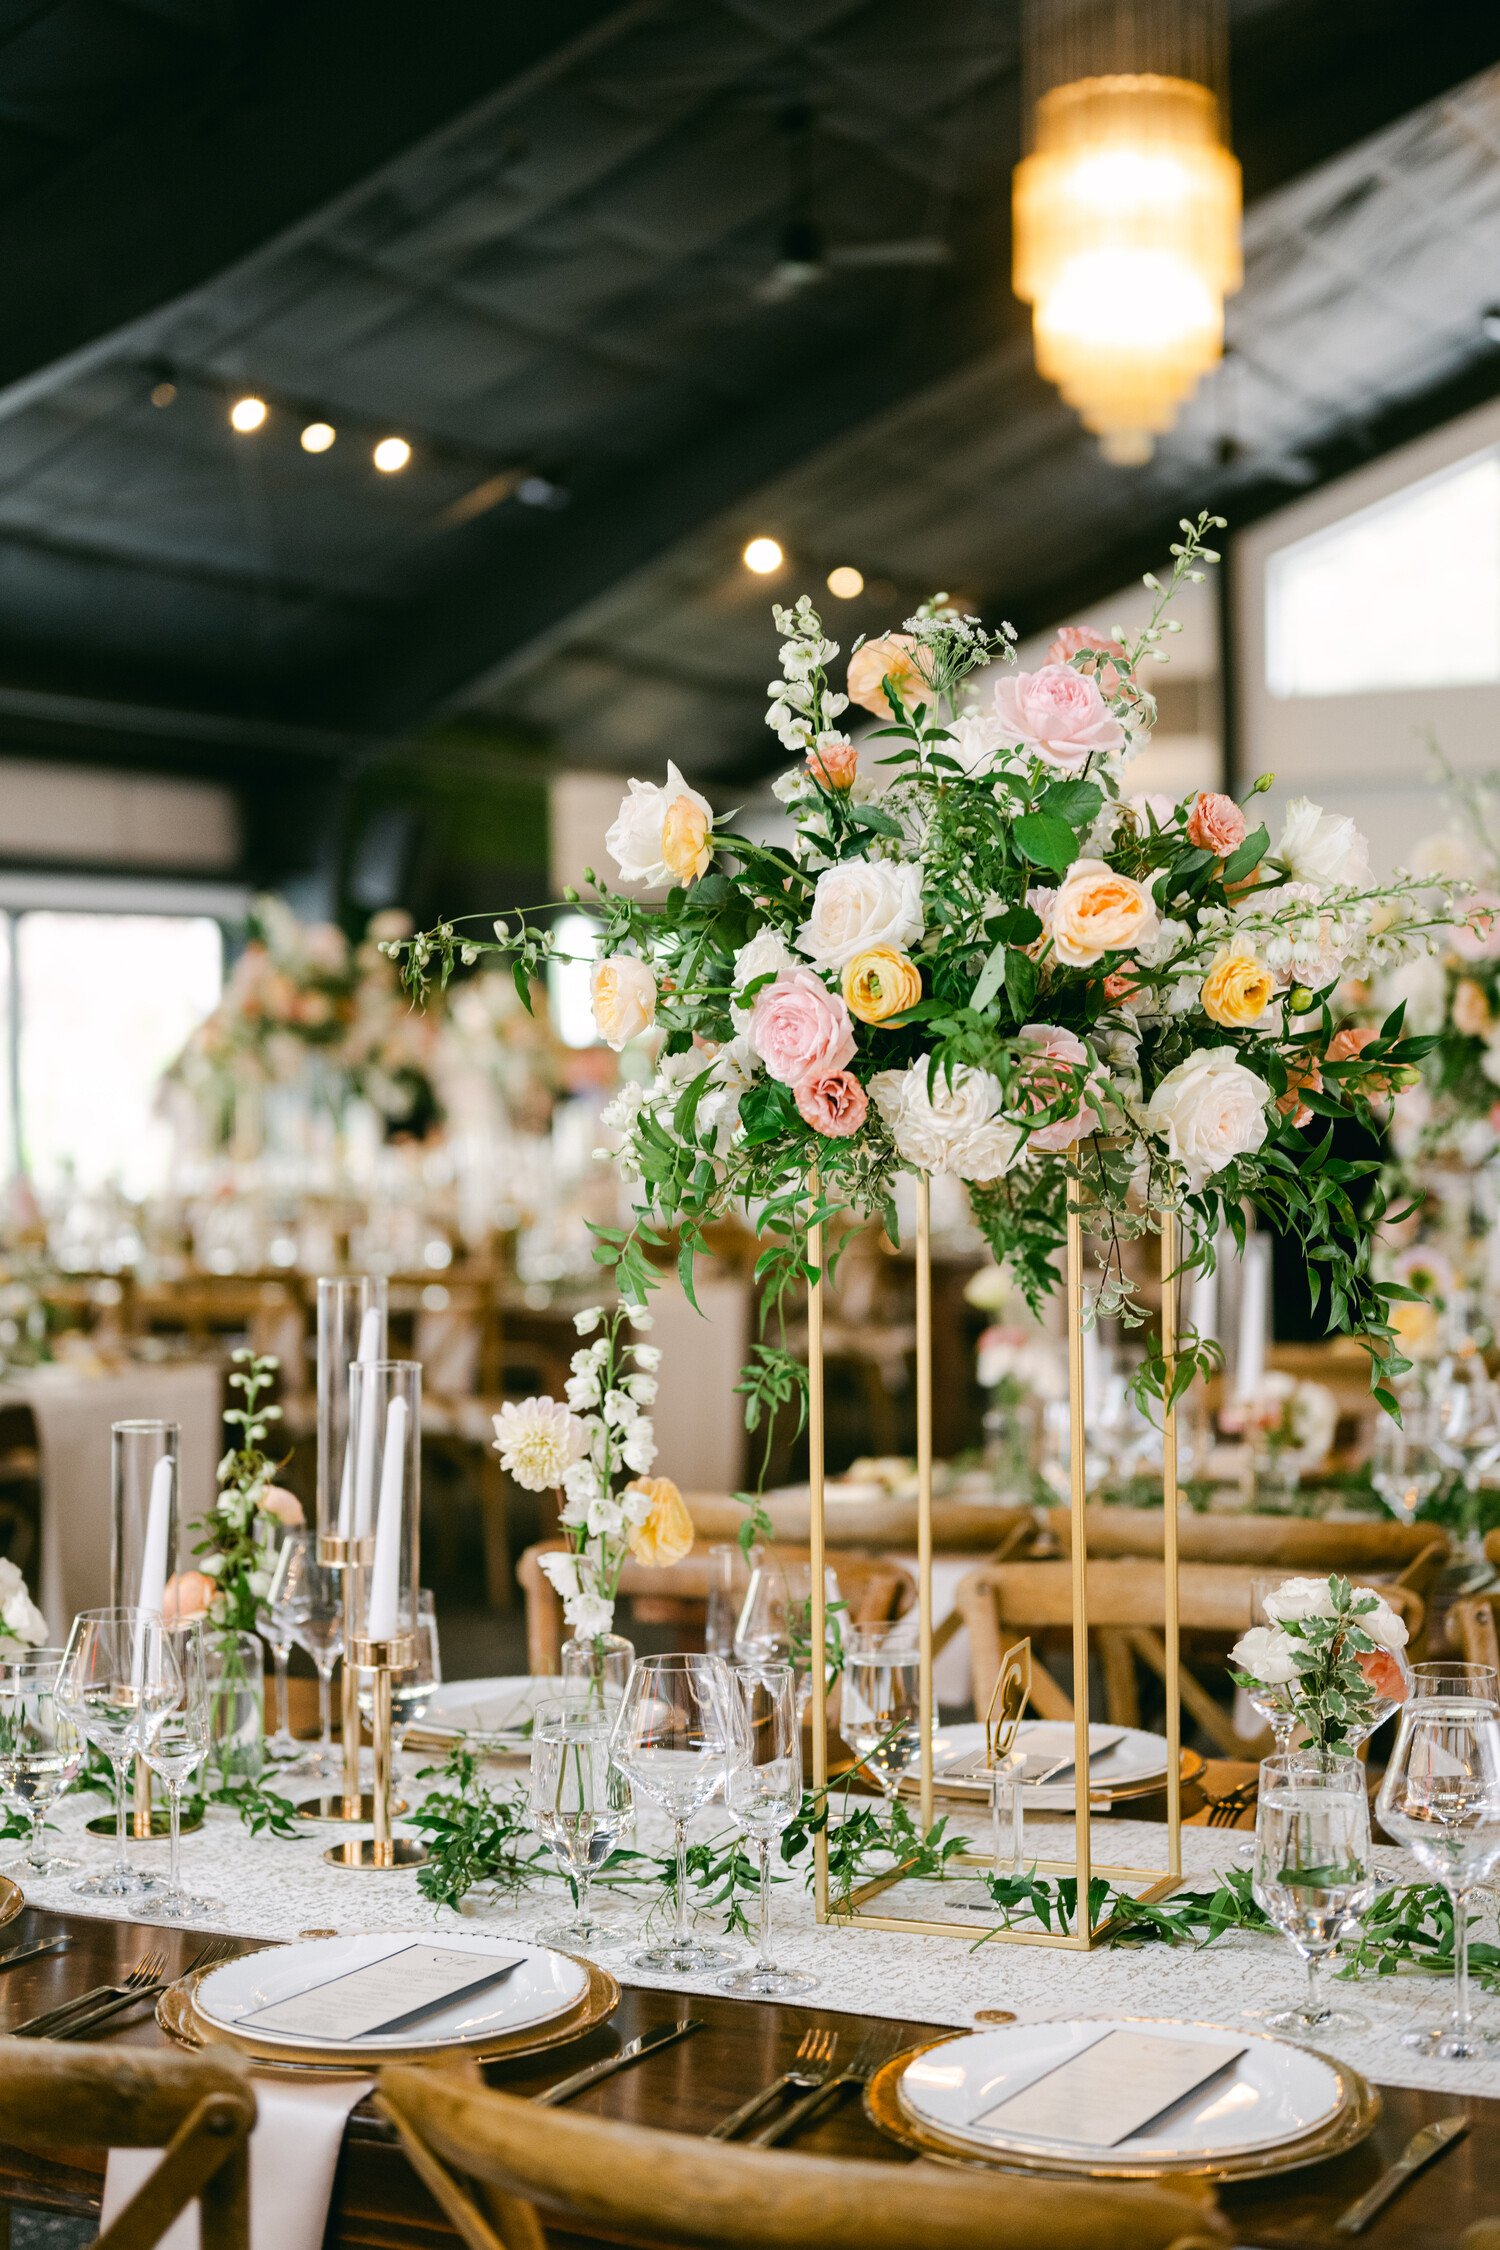 Elm Estate Wedding photos, photo of the wedding floral arrangements in soft colors and greenery